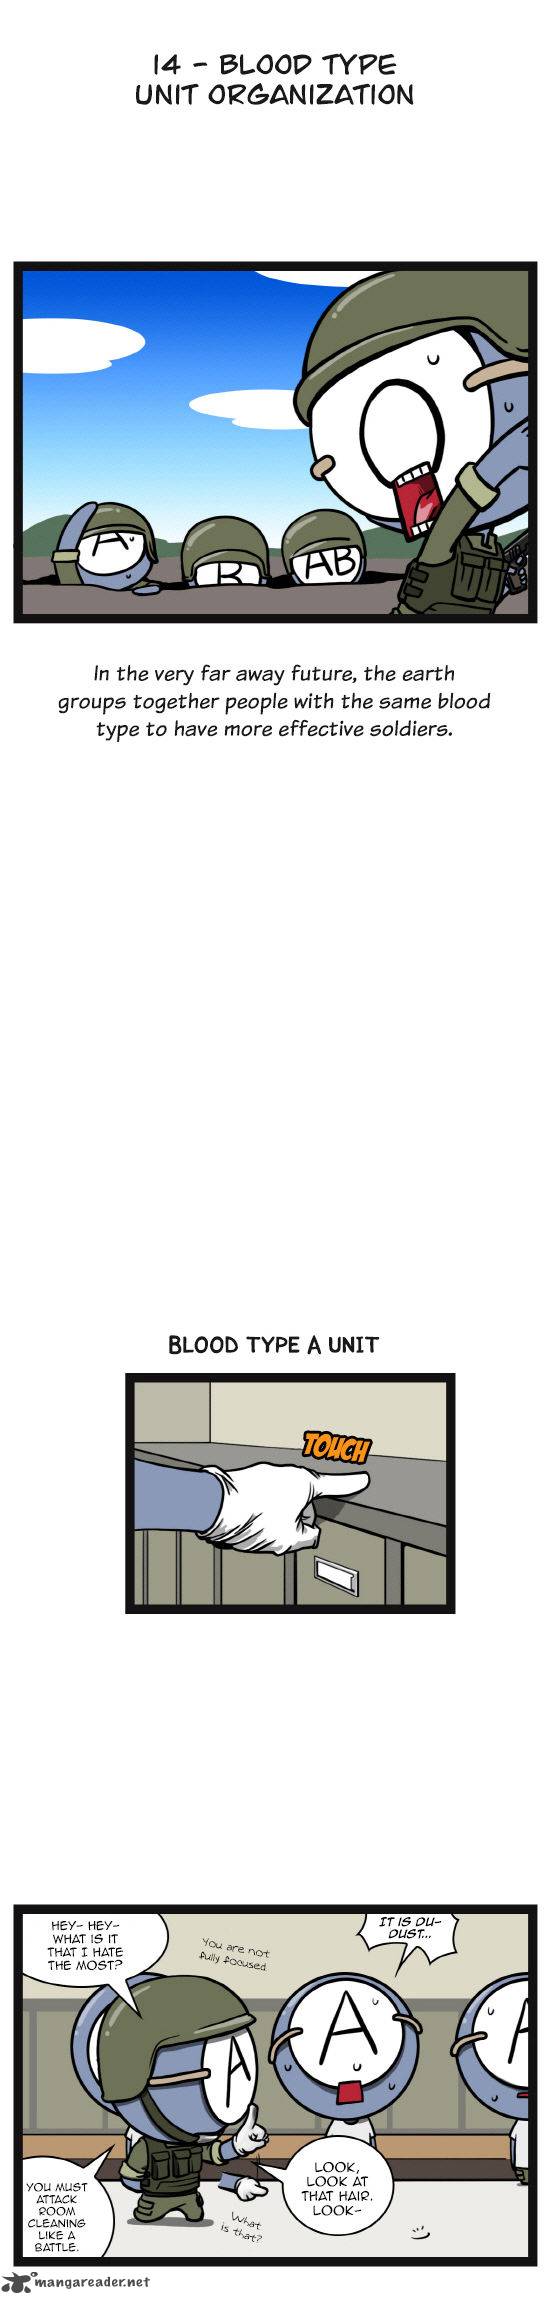 a_simple_thinking_about_blood_types_14_2